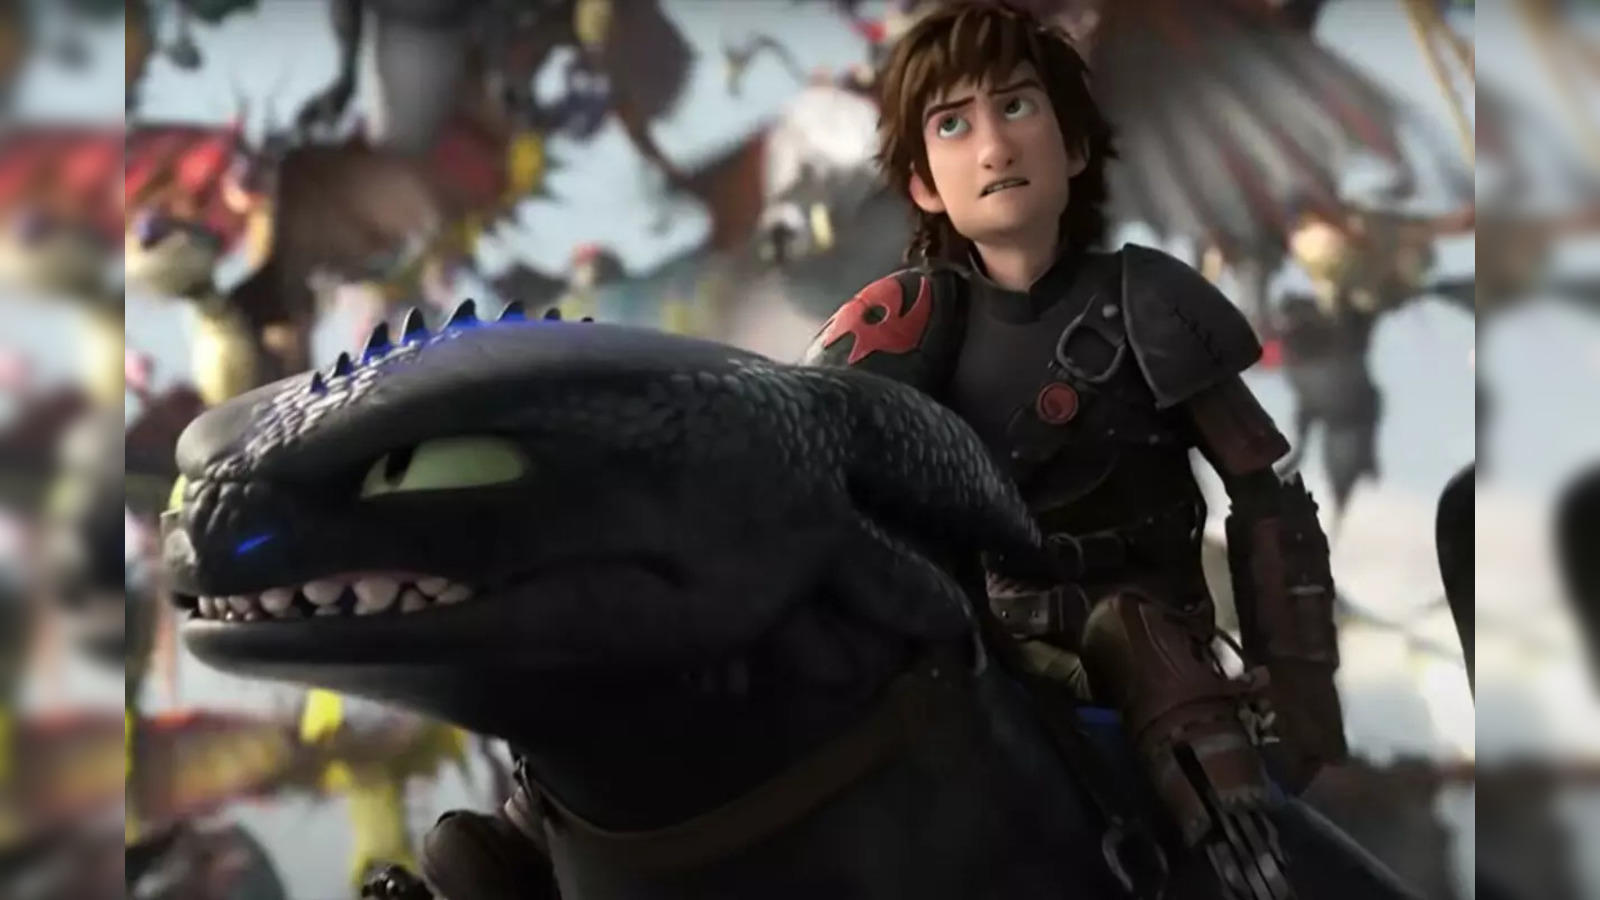 How To Train Your Dragon Live-Action Movie: How To Train Your